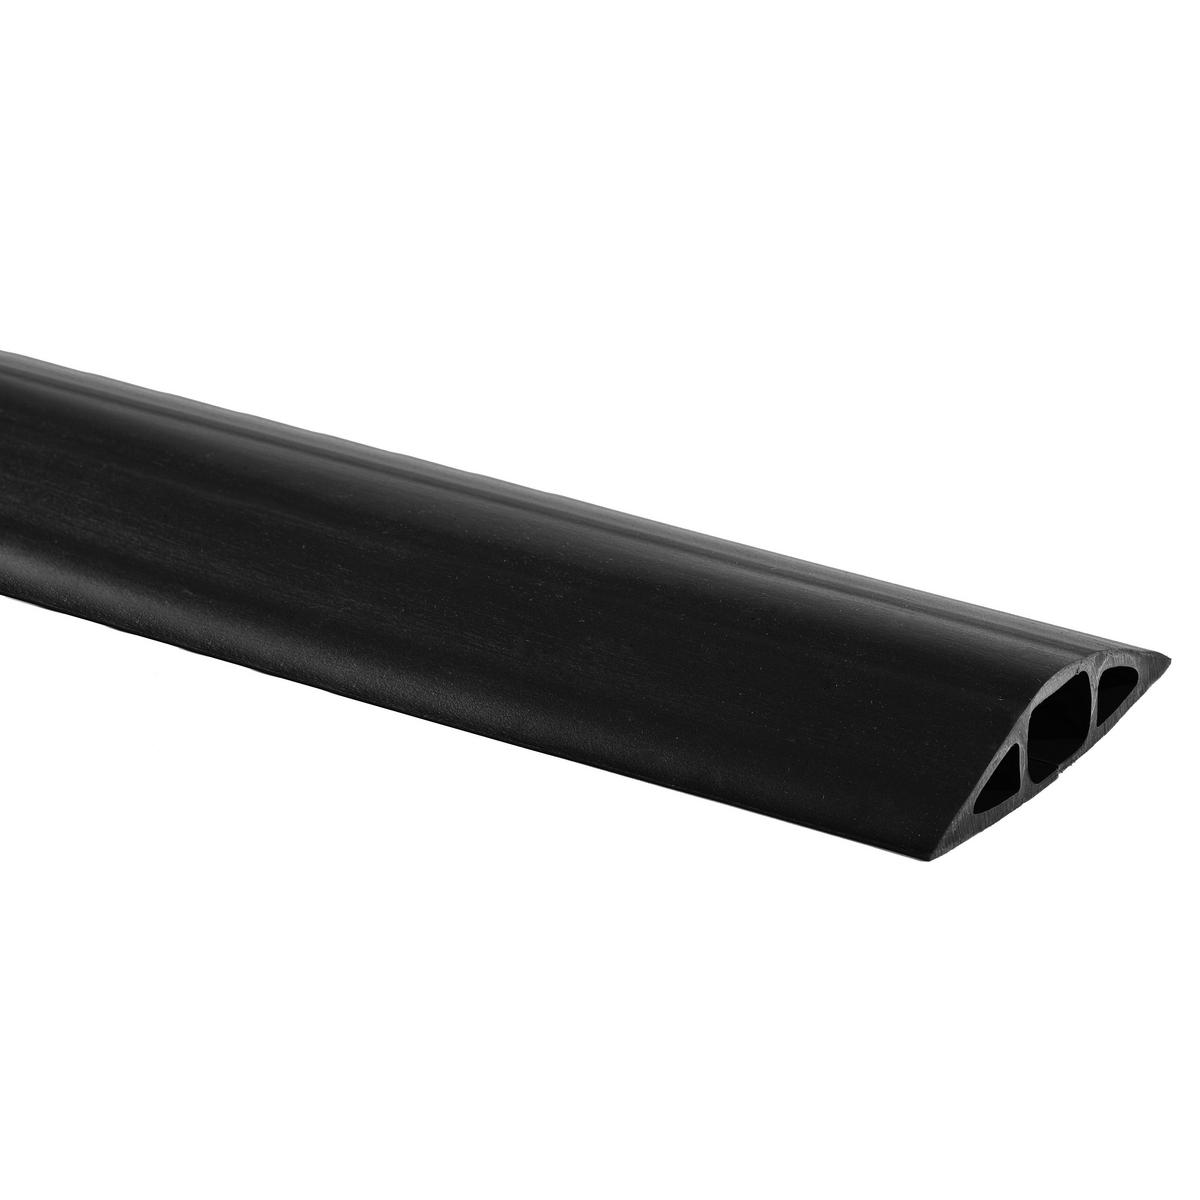 Hubbell BRYFT4BK5 FloorTrak Flexible Non-Metallic Cover for Cables, Size 4, Black, 5' 